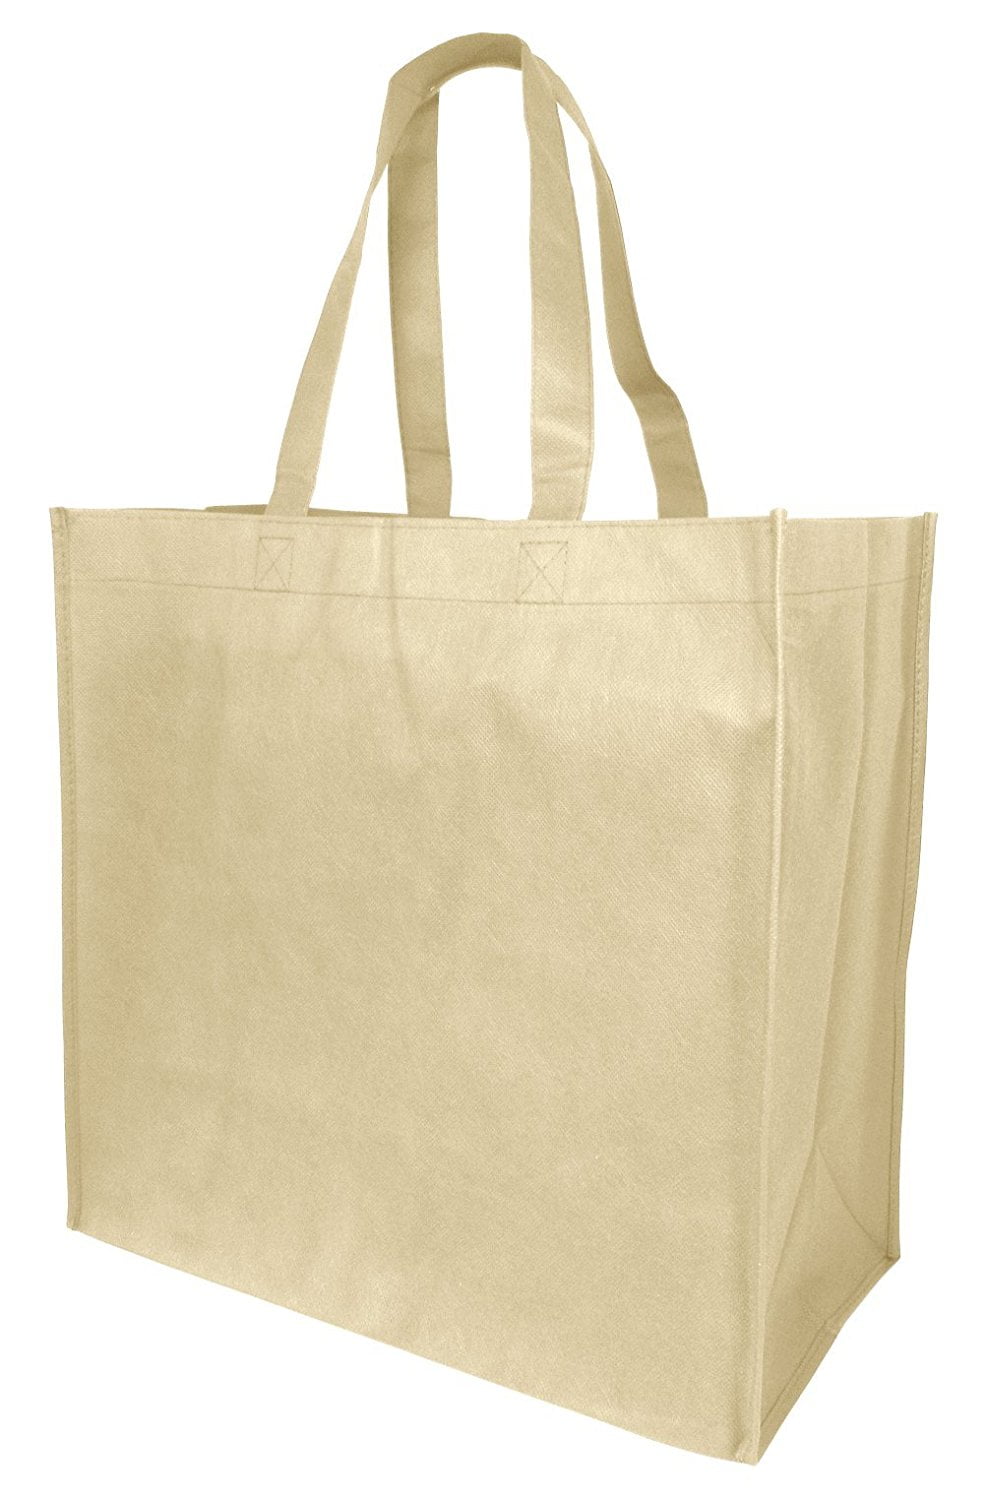 Reusable Grocery Bags Reinforced Handle Foldable Large Heavy Duty ...